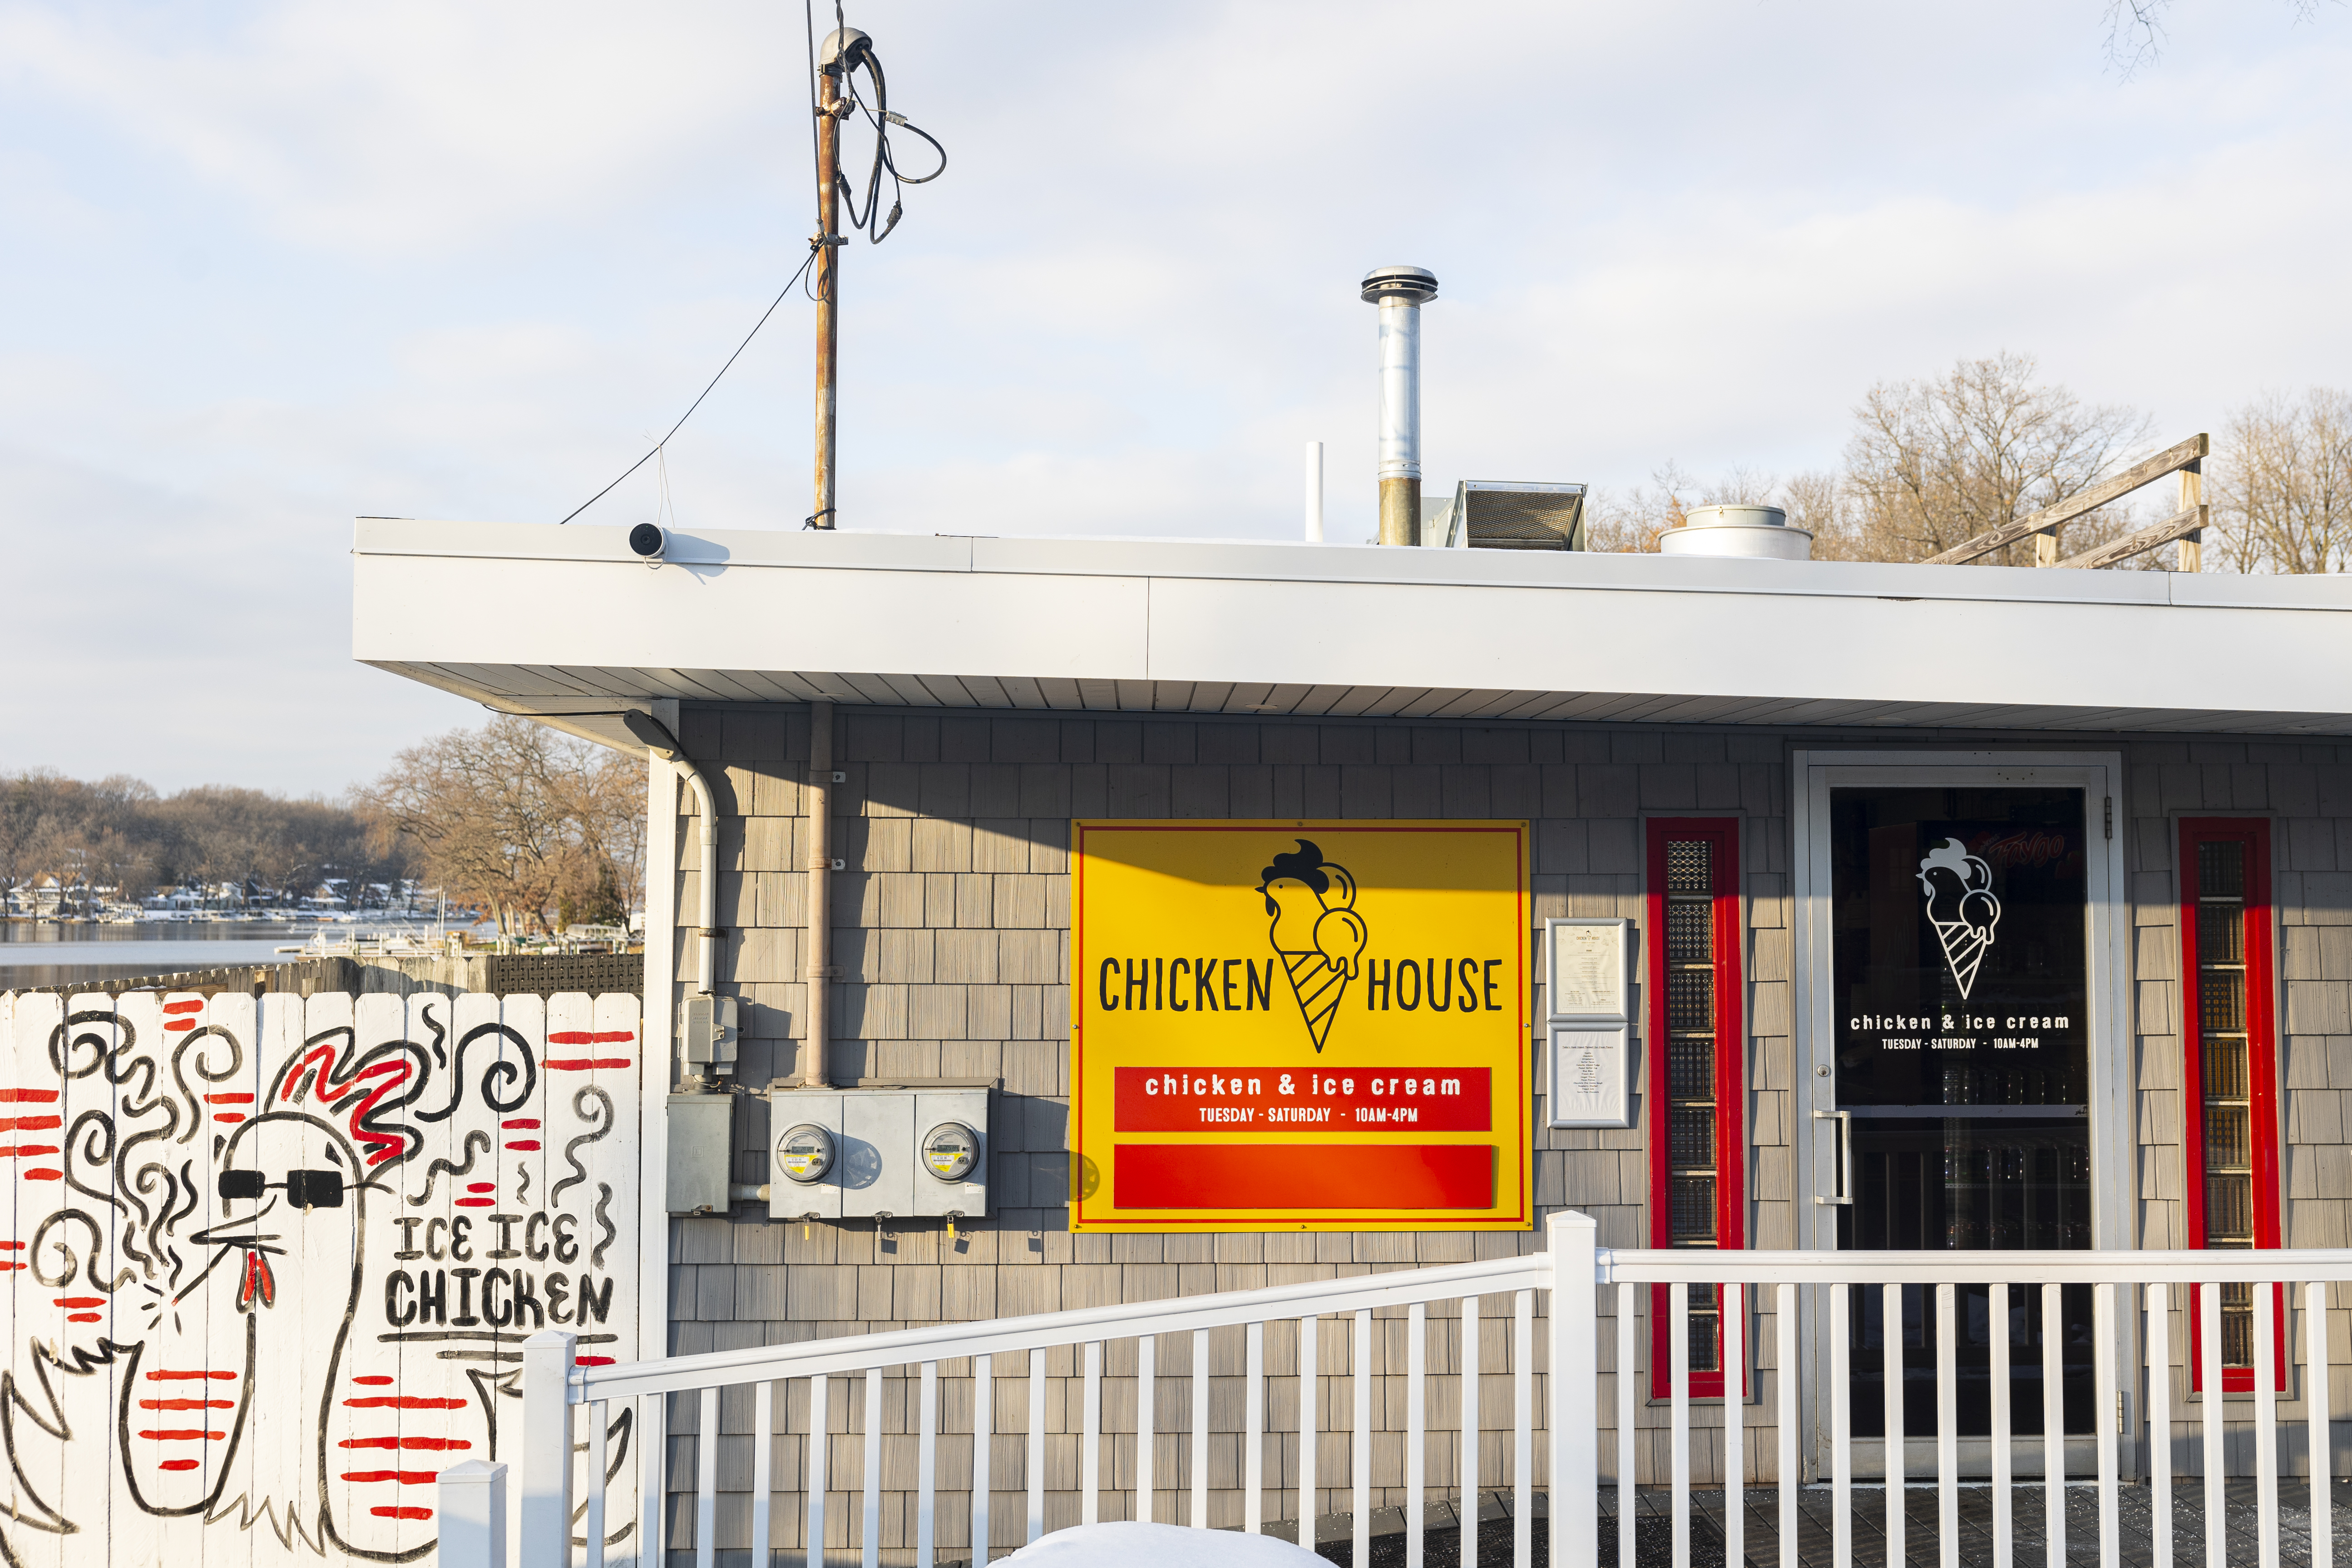 Chicken House on Gull Lake opened in 2020, the owners Paul Sr. and Jennifer Dykstra recently opened Compass and Cleaver across the street at 12454 E D Ave. in Richland, Michigan.